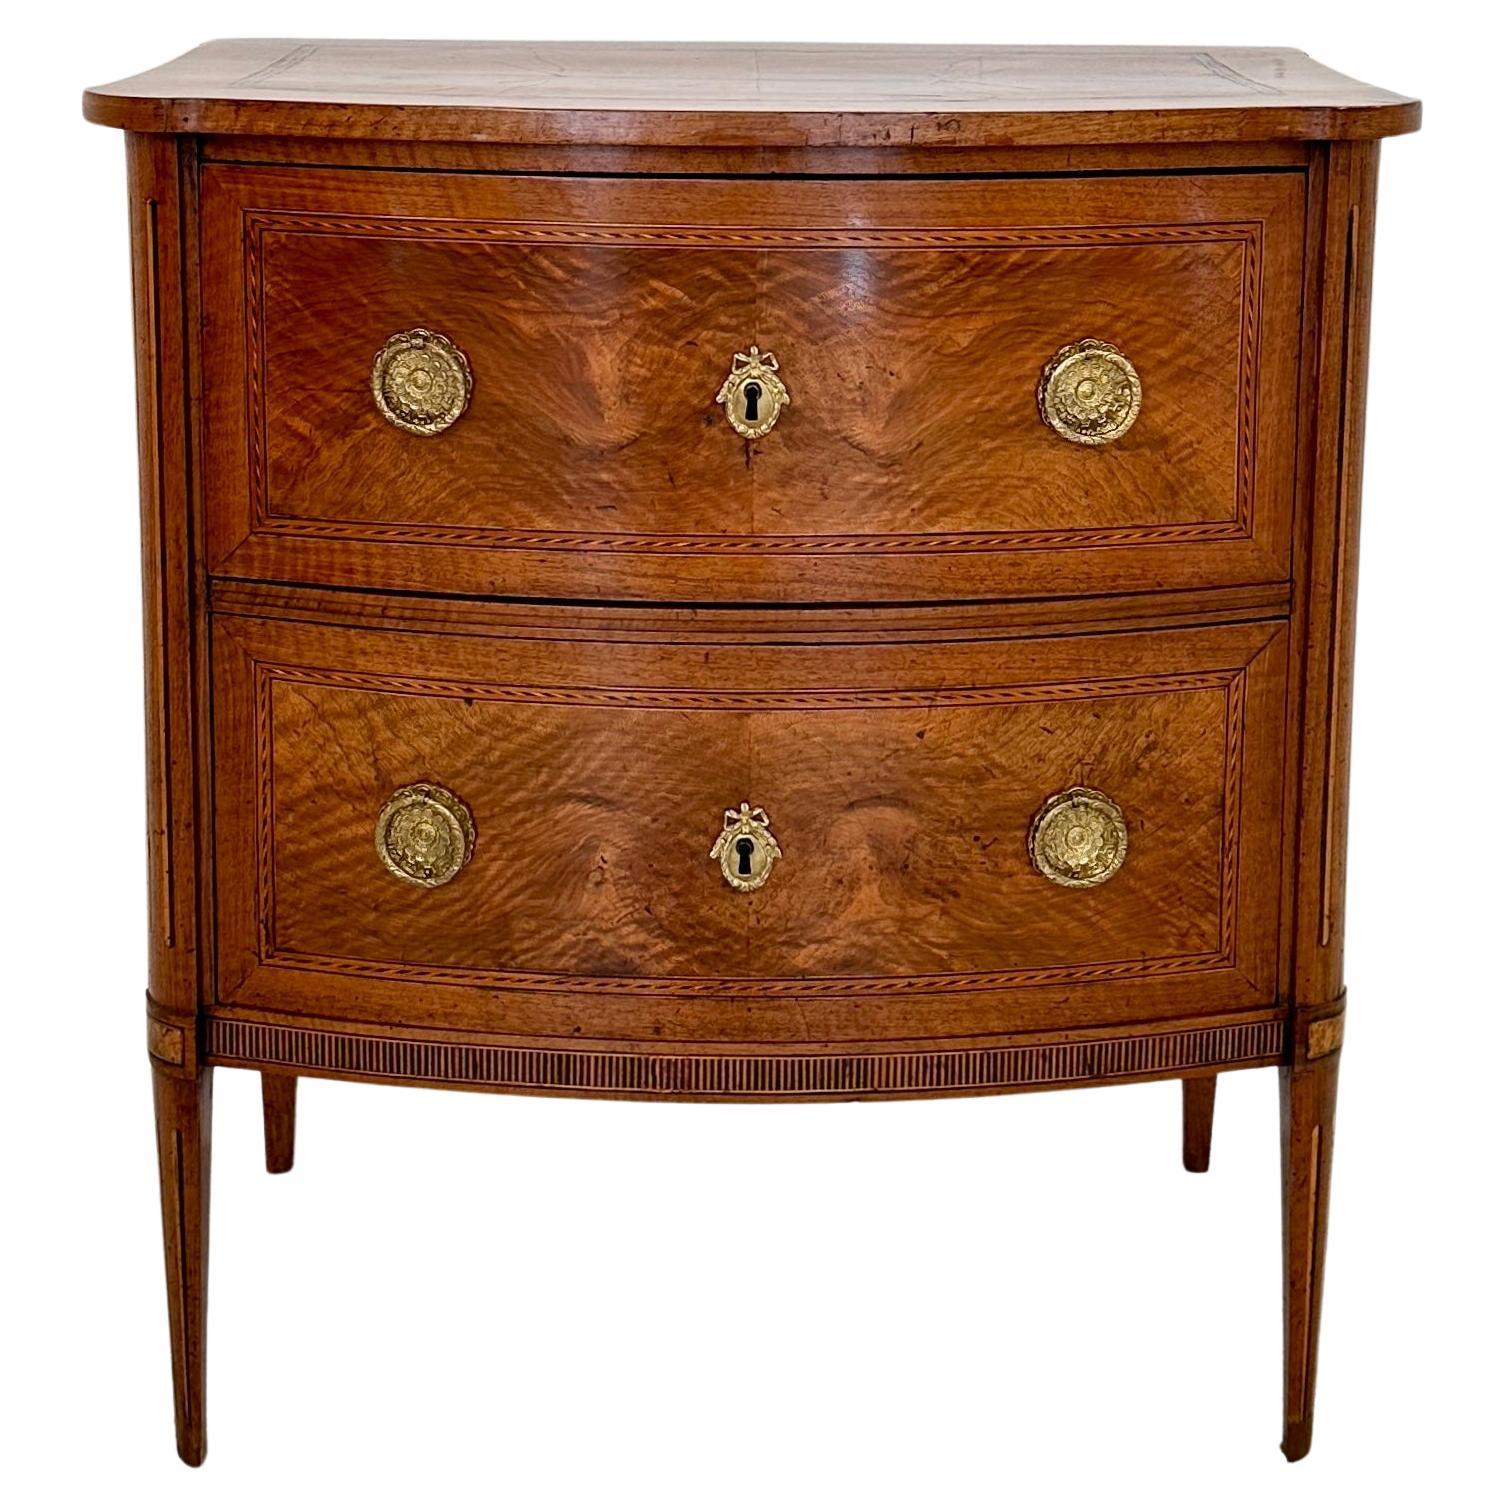 Small 18th Century German Louis Seize Commode in Walnut with 2 Drawers, 1790 For Sale